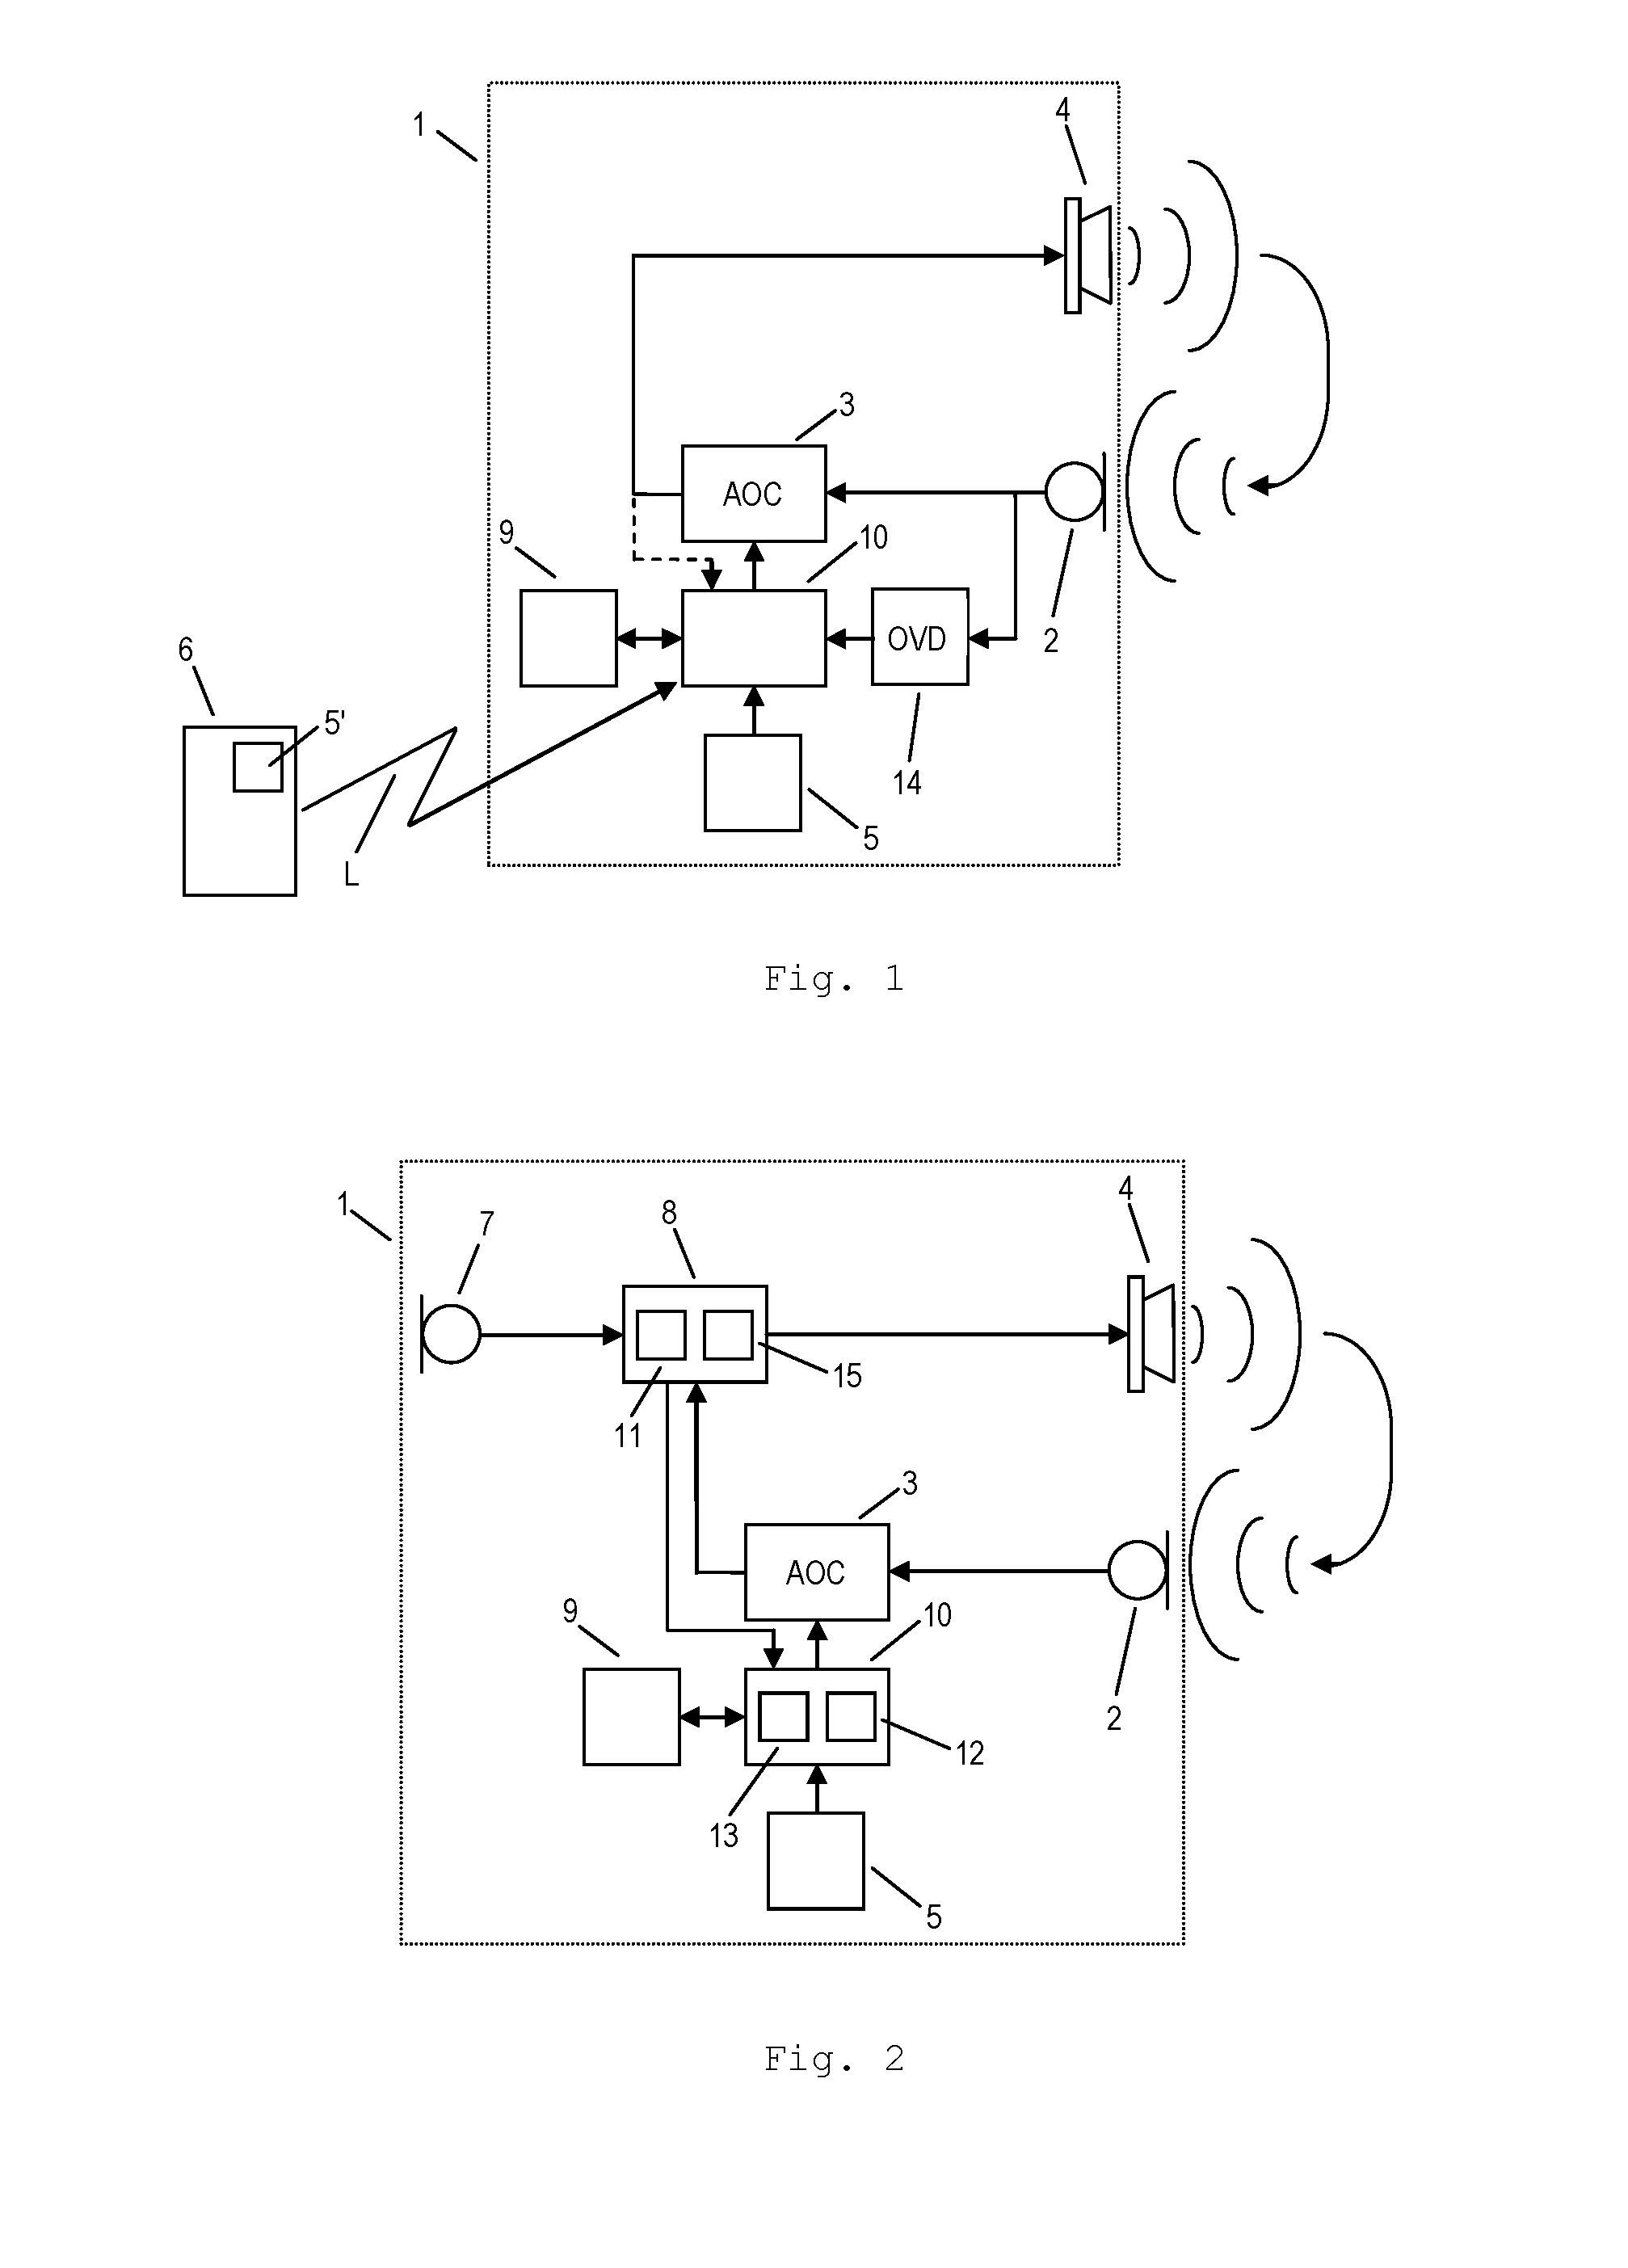 Method for operating a hearing device capable of active occlusion control and a hearing device with user adjustable active occlusion control